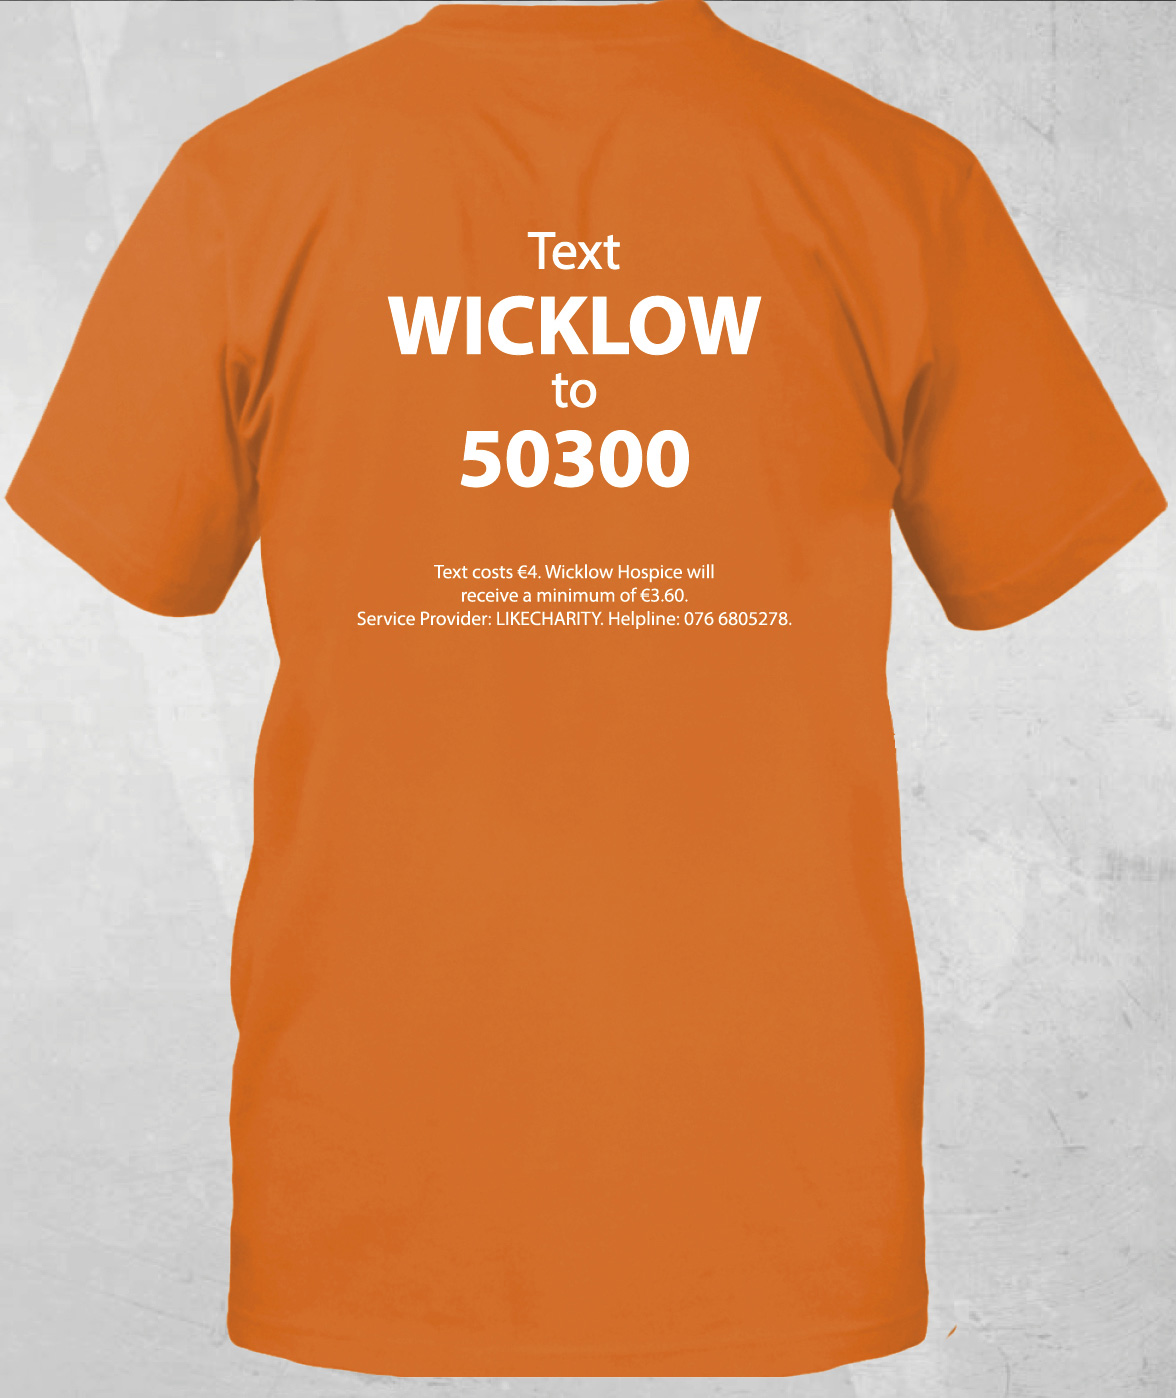 Wicklow Hospice T Shirt back view